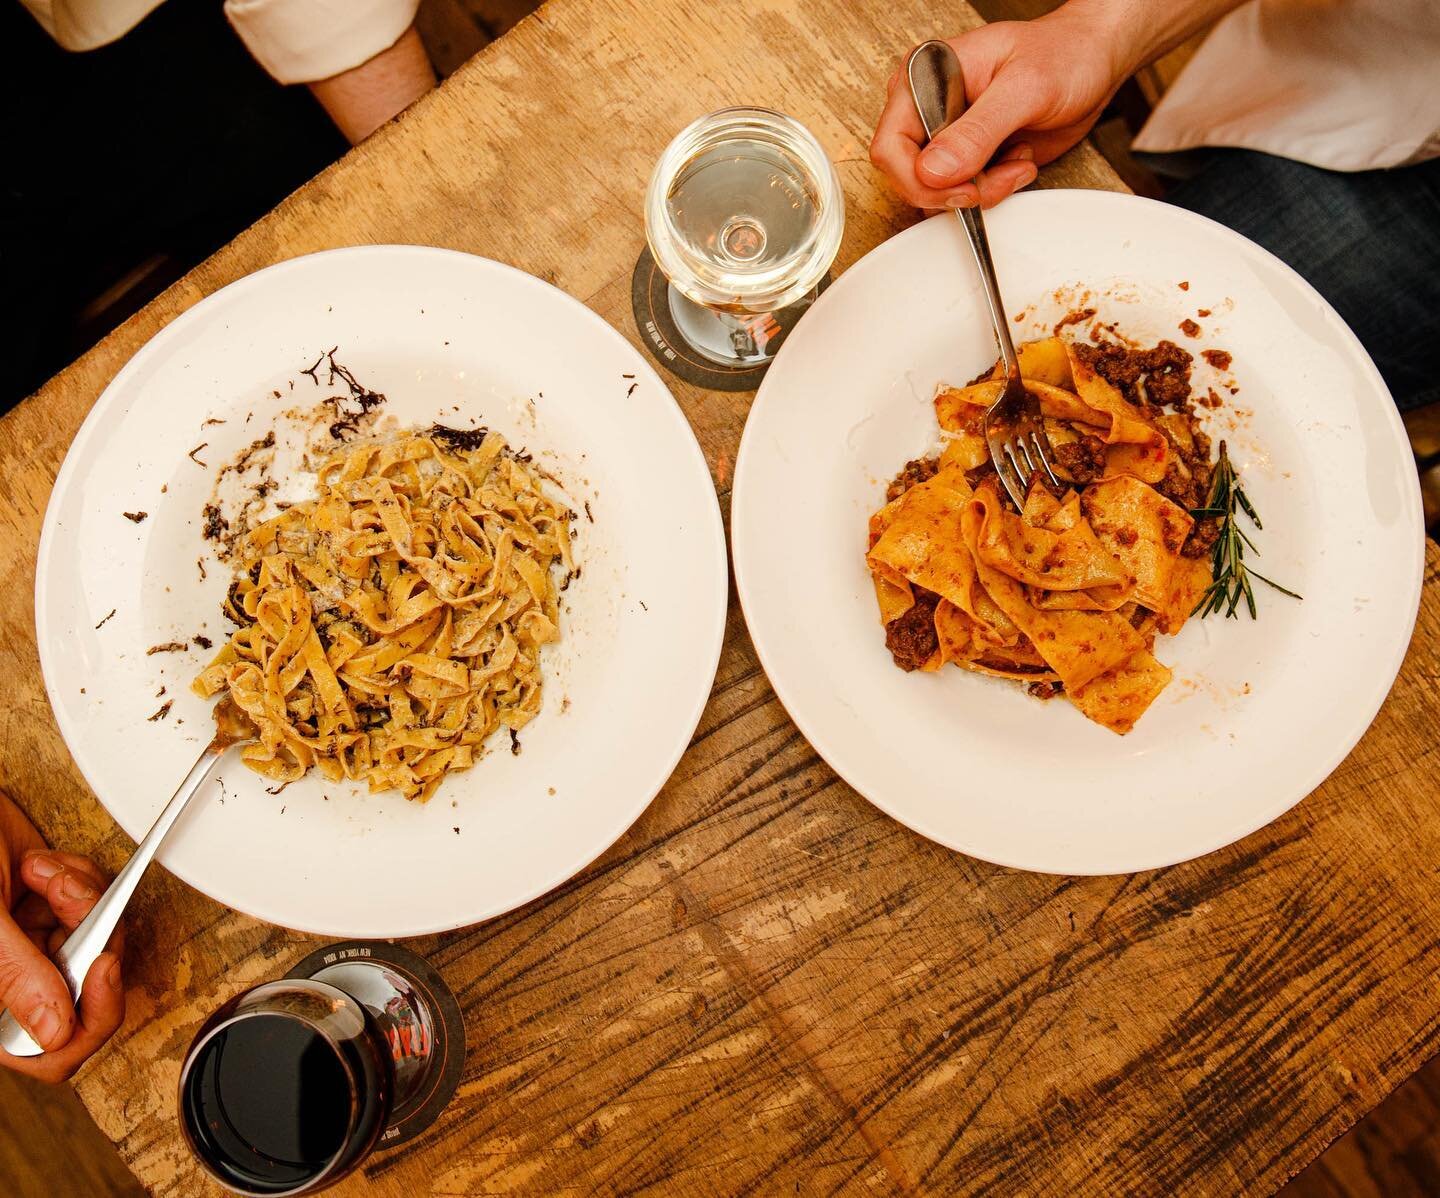 Sharing is caring!  Eat pasta with friends! 🍝❤️🍷 photo by @tinabfoto